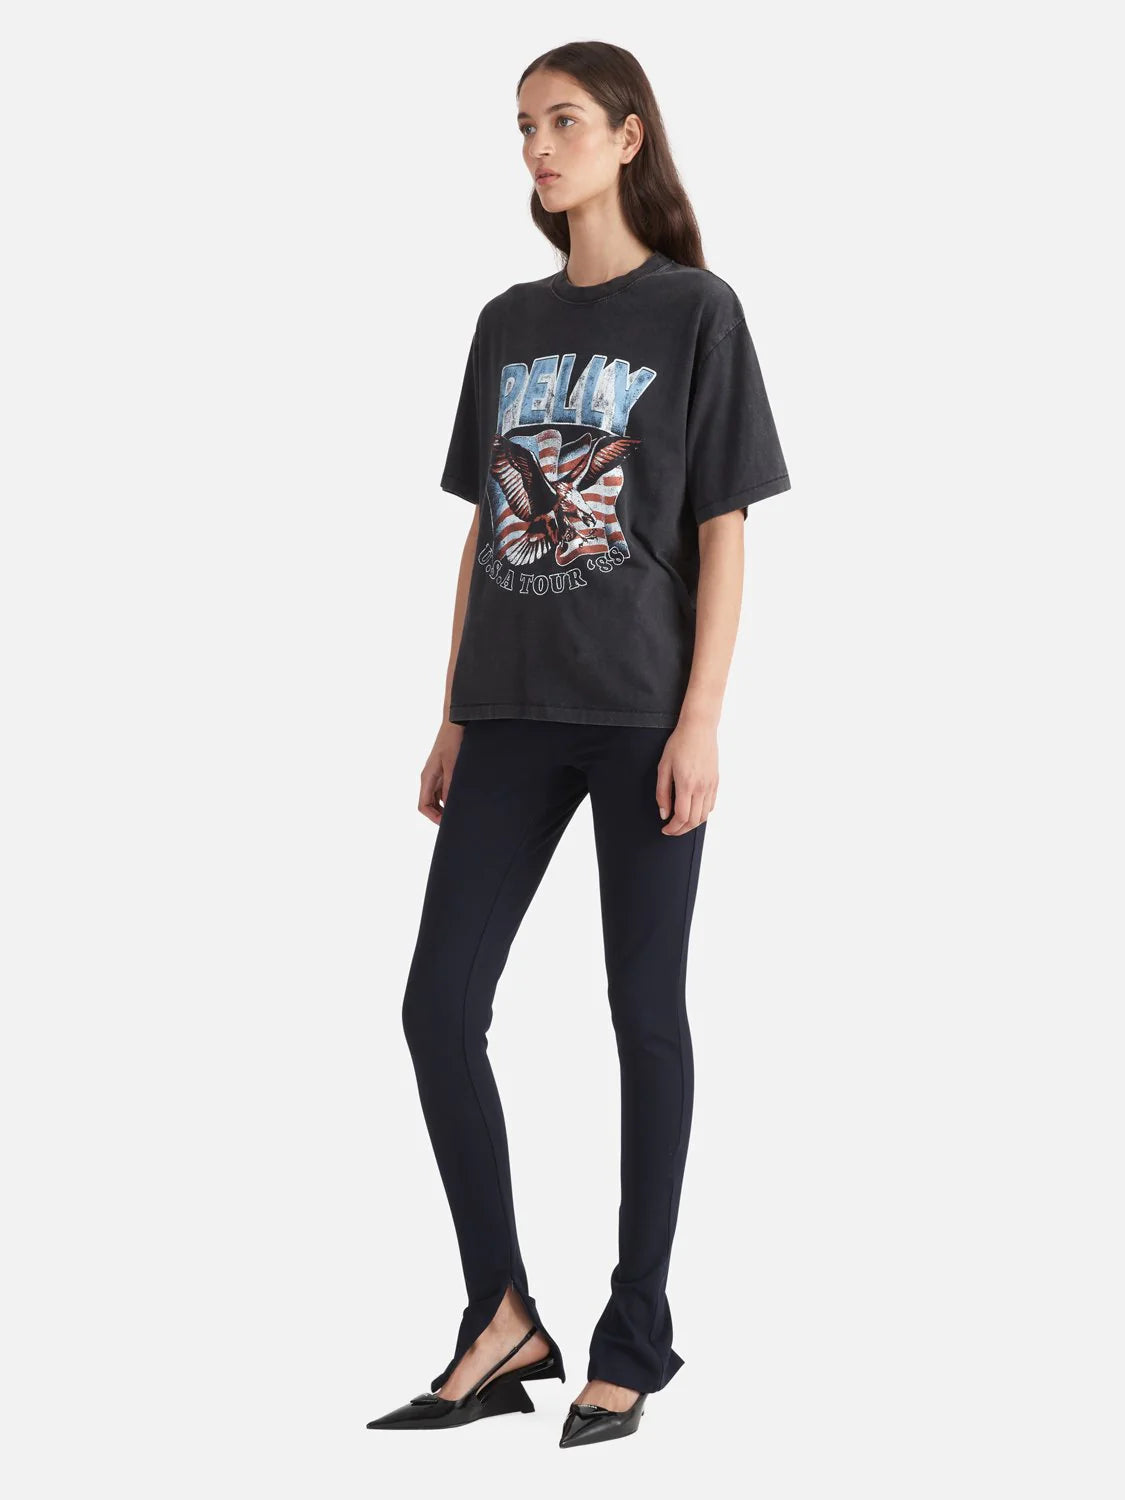 Ena Pelly- Pelly Tour Relaxed Tee-Vintage Black